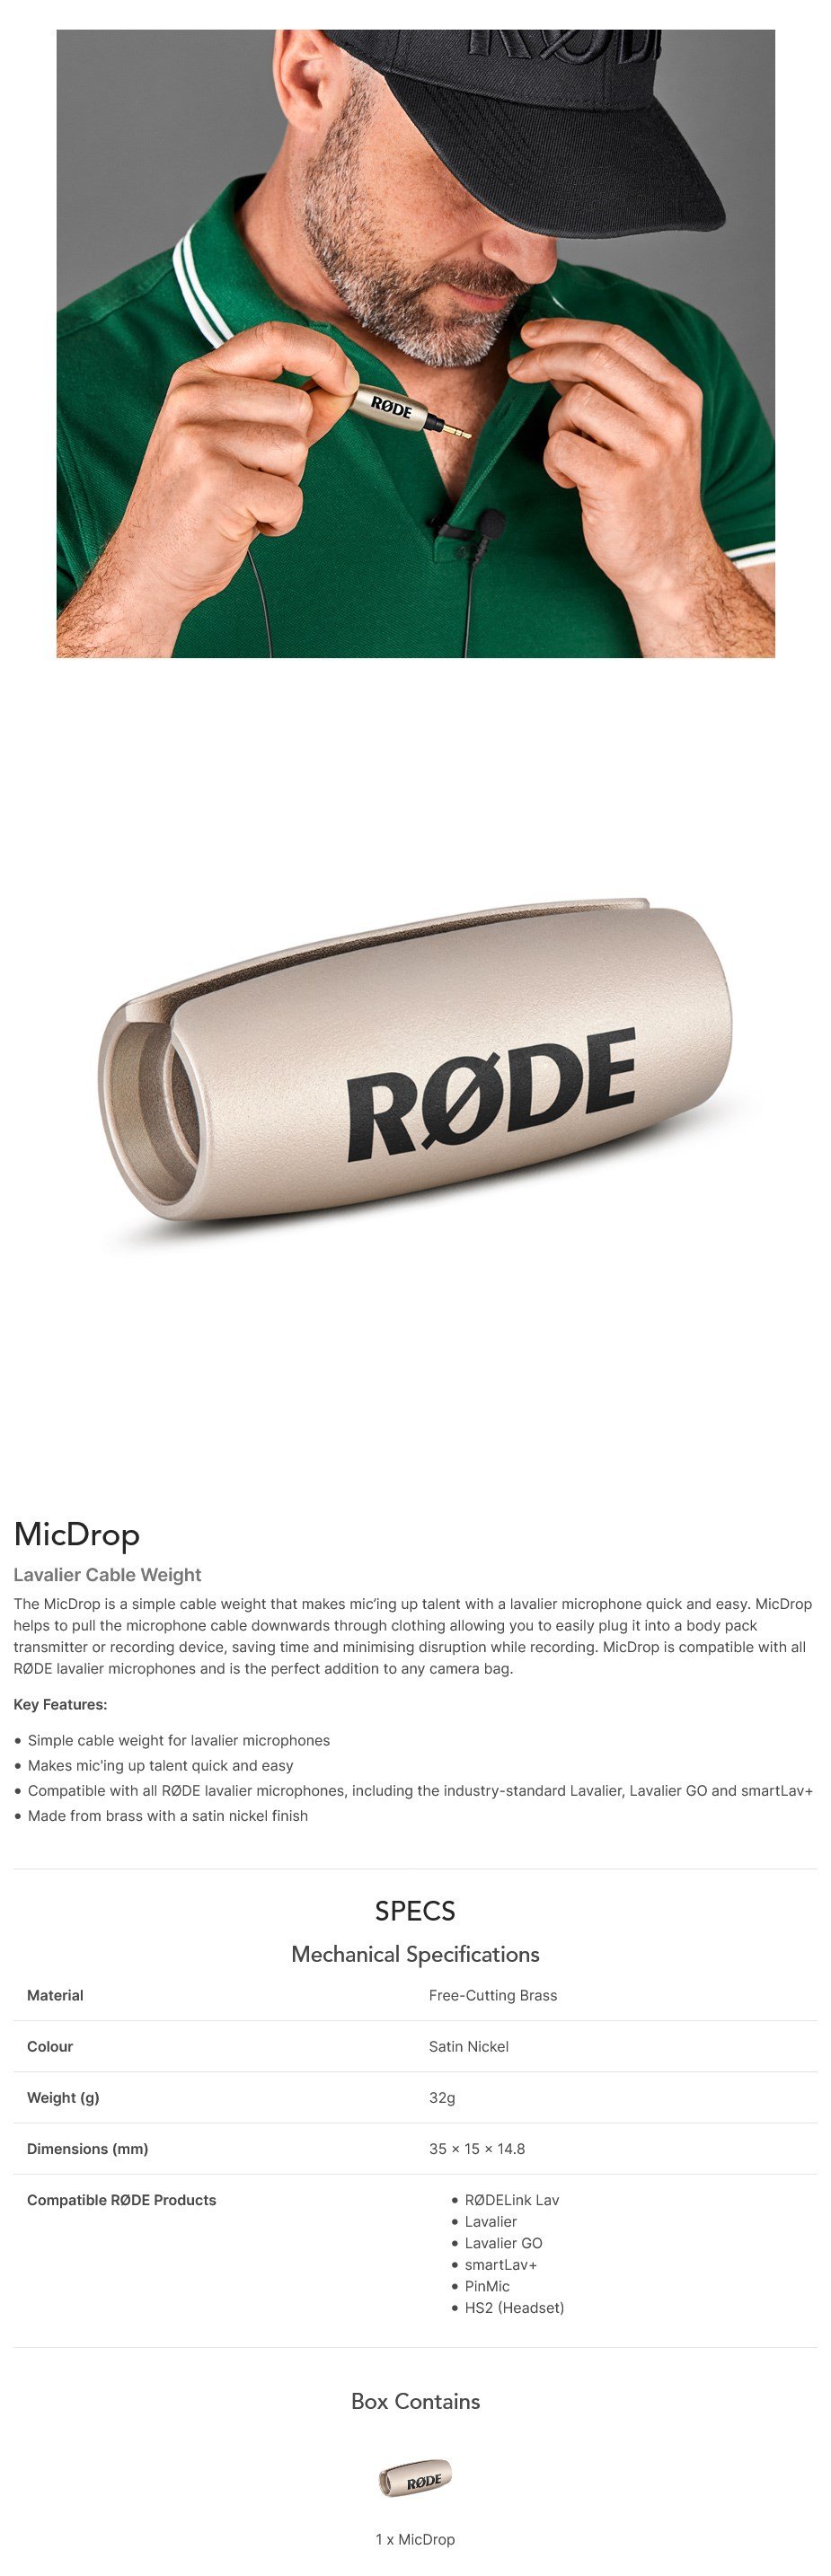 A large marketing image providing additional information about the product RODE MicDrop Lavalier Cable Weight - Additional alt info not provided